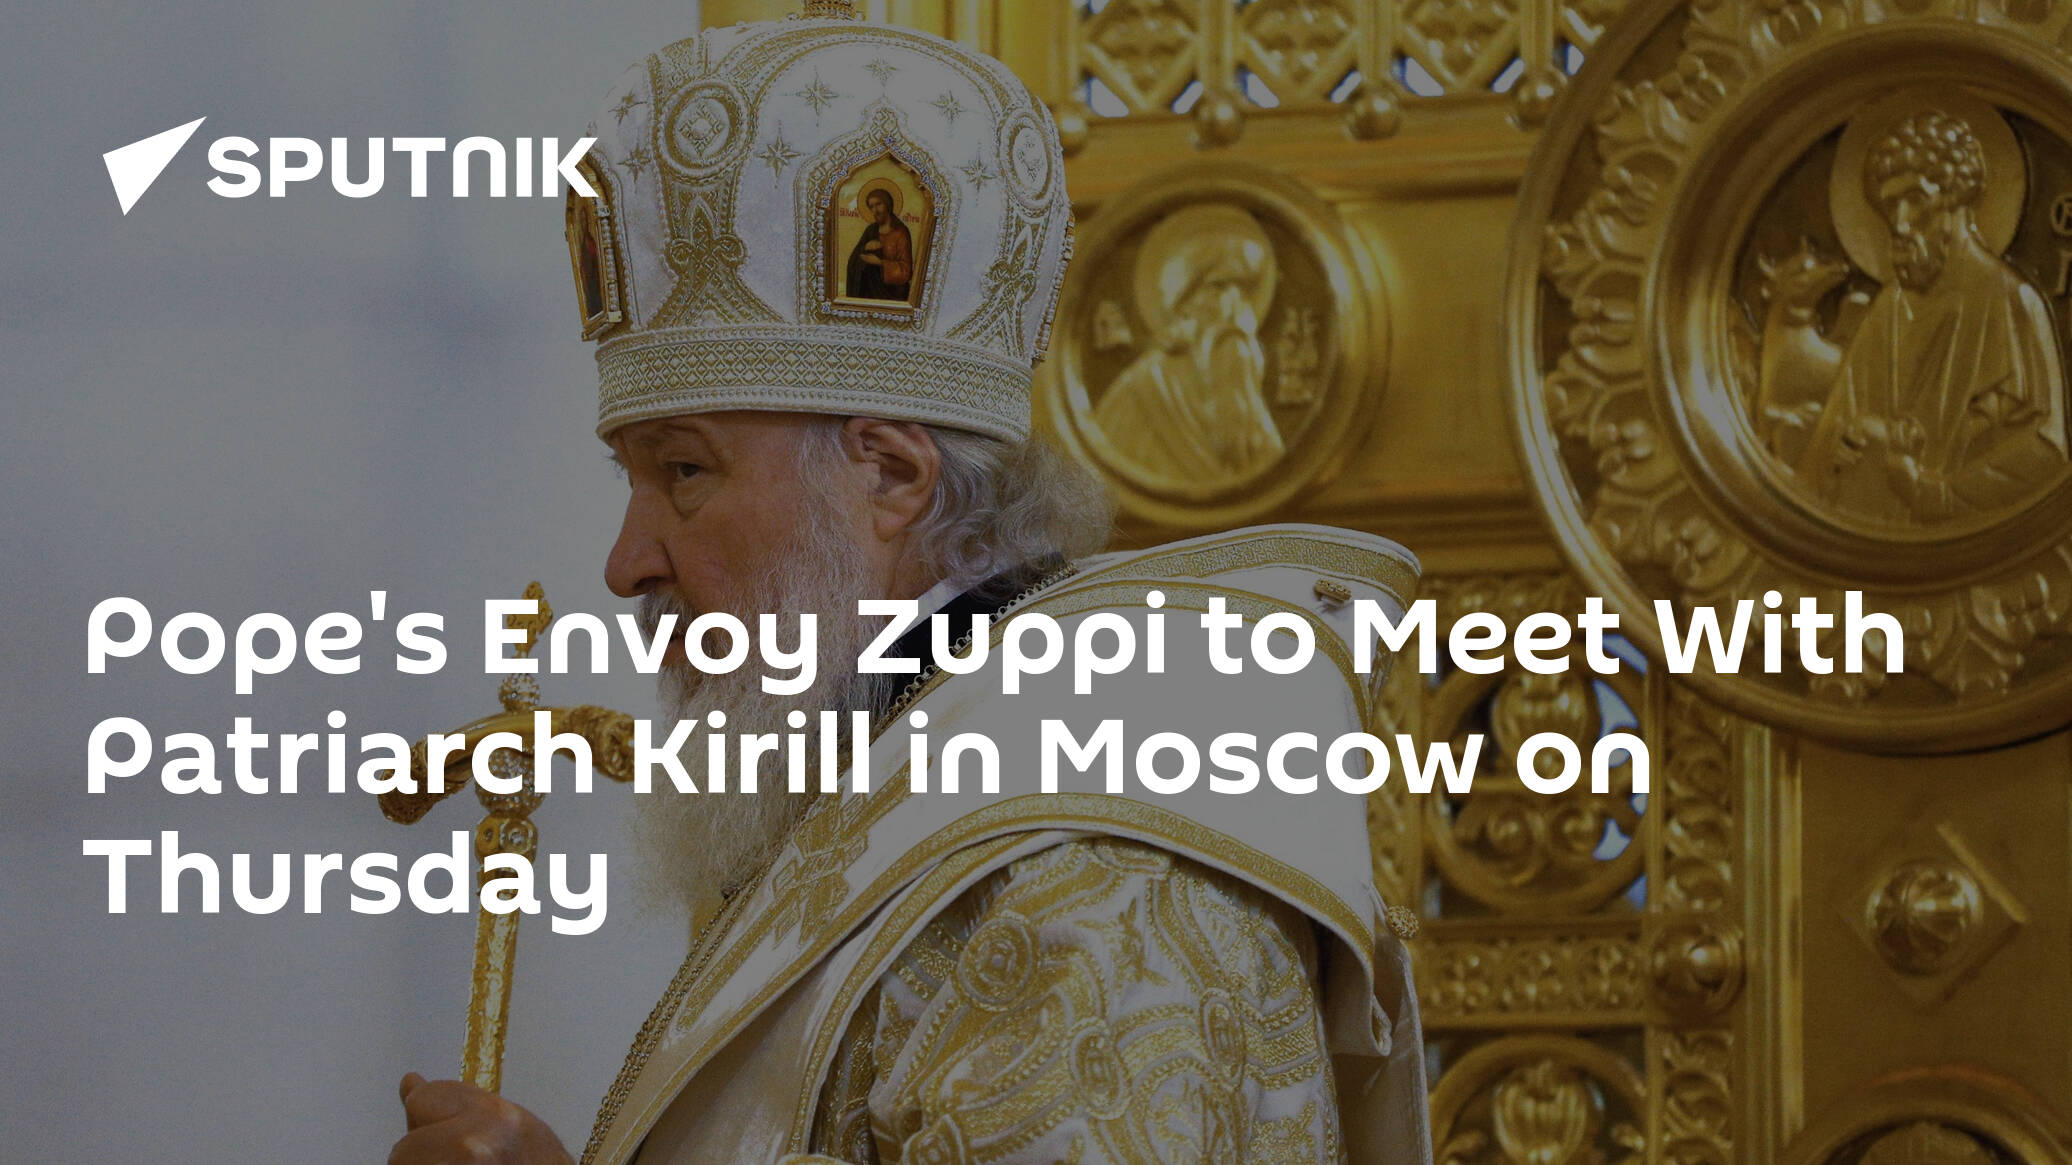 Pope's Envoy Zuppi to Meet With Patriarch Kirill in Moscow on Thursday